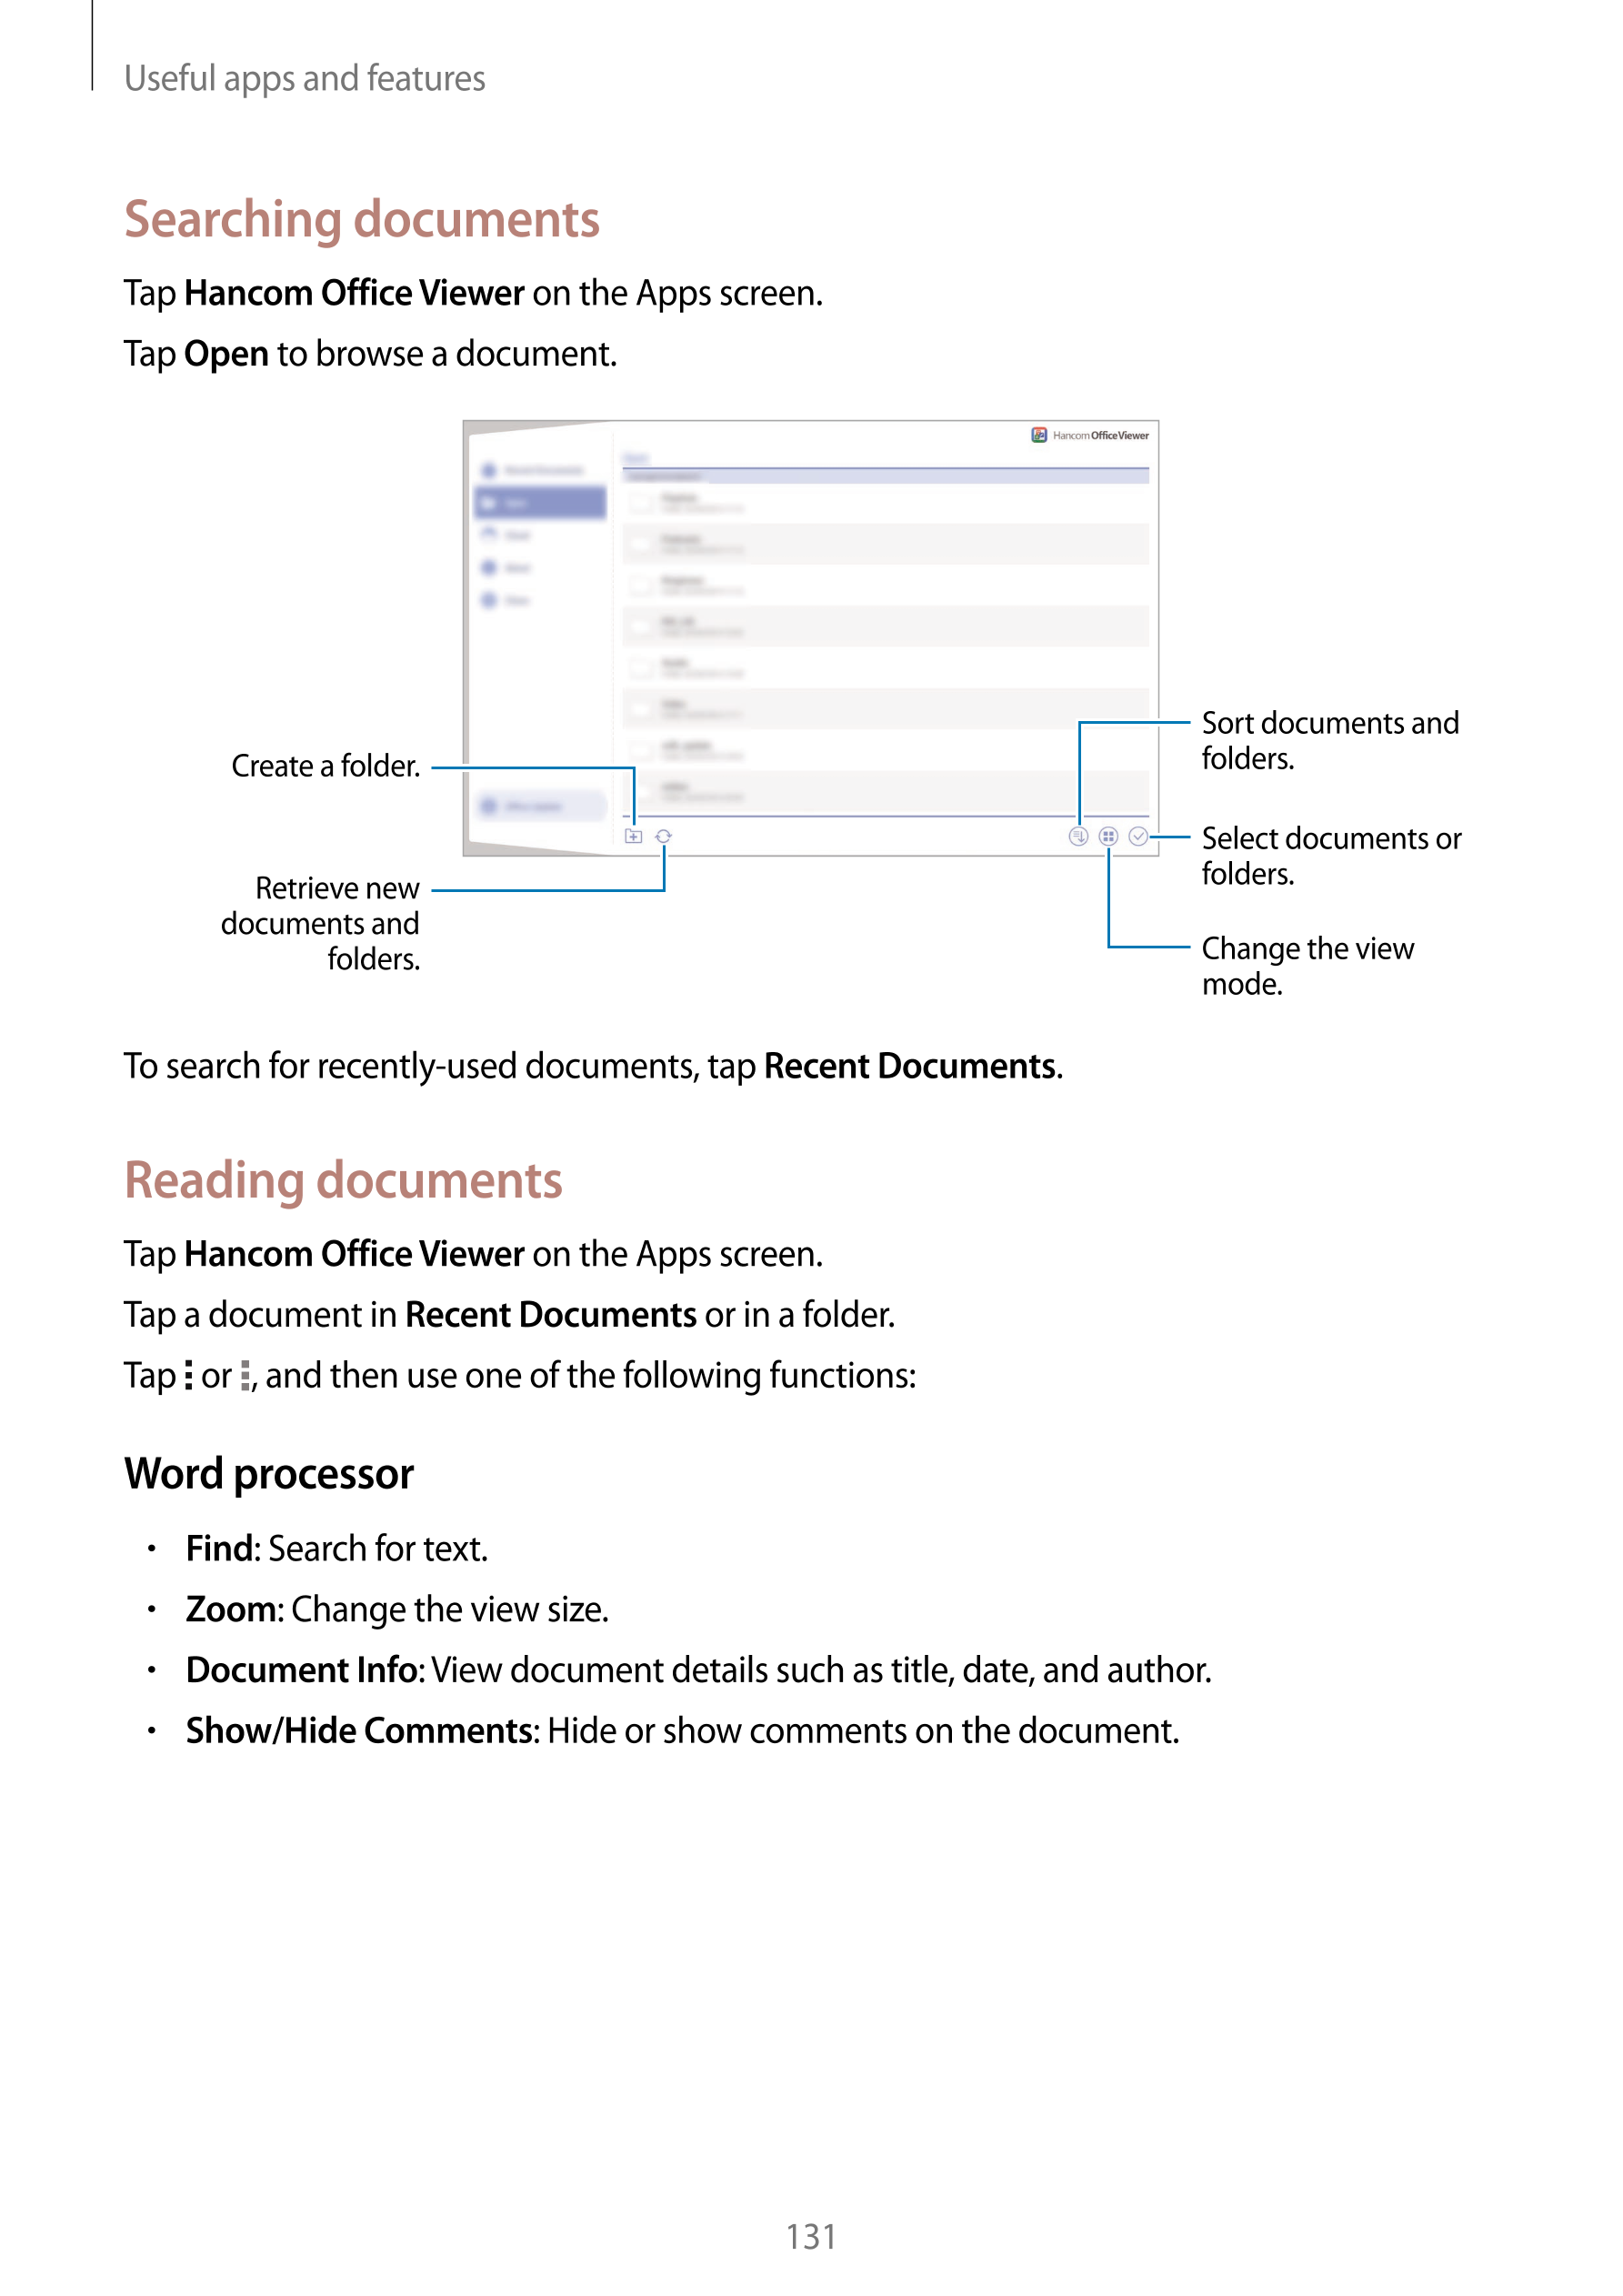 Useful apps and features
Searching documents
Tap  Hancom Office Viewer on the Apps screen.
Tap  Open to browse a document.
Sort 